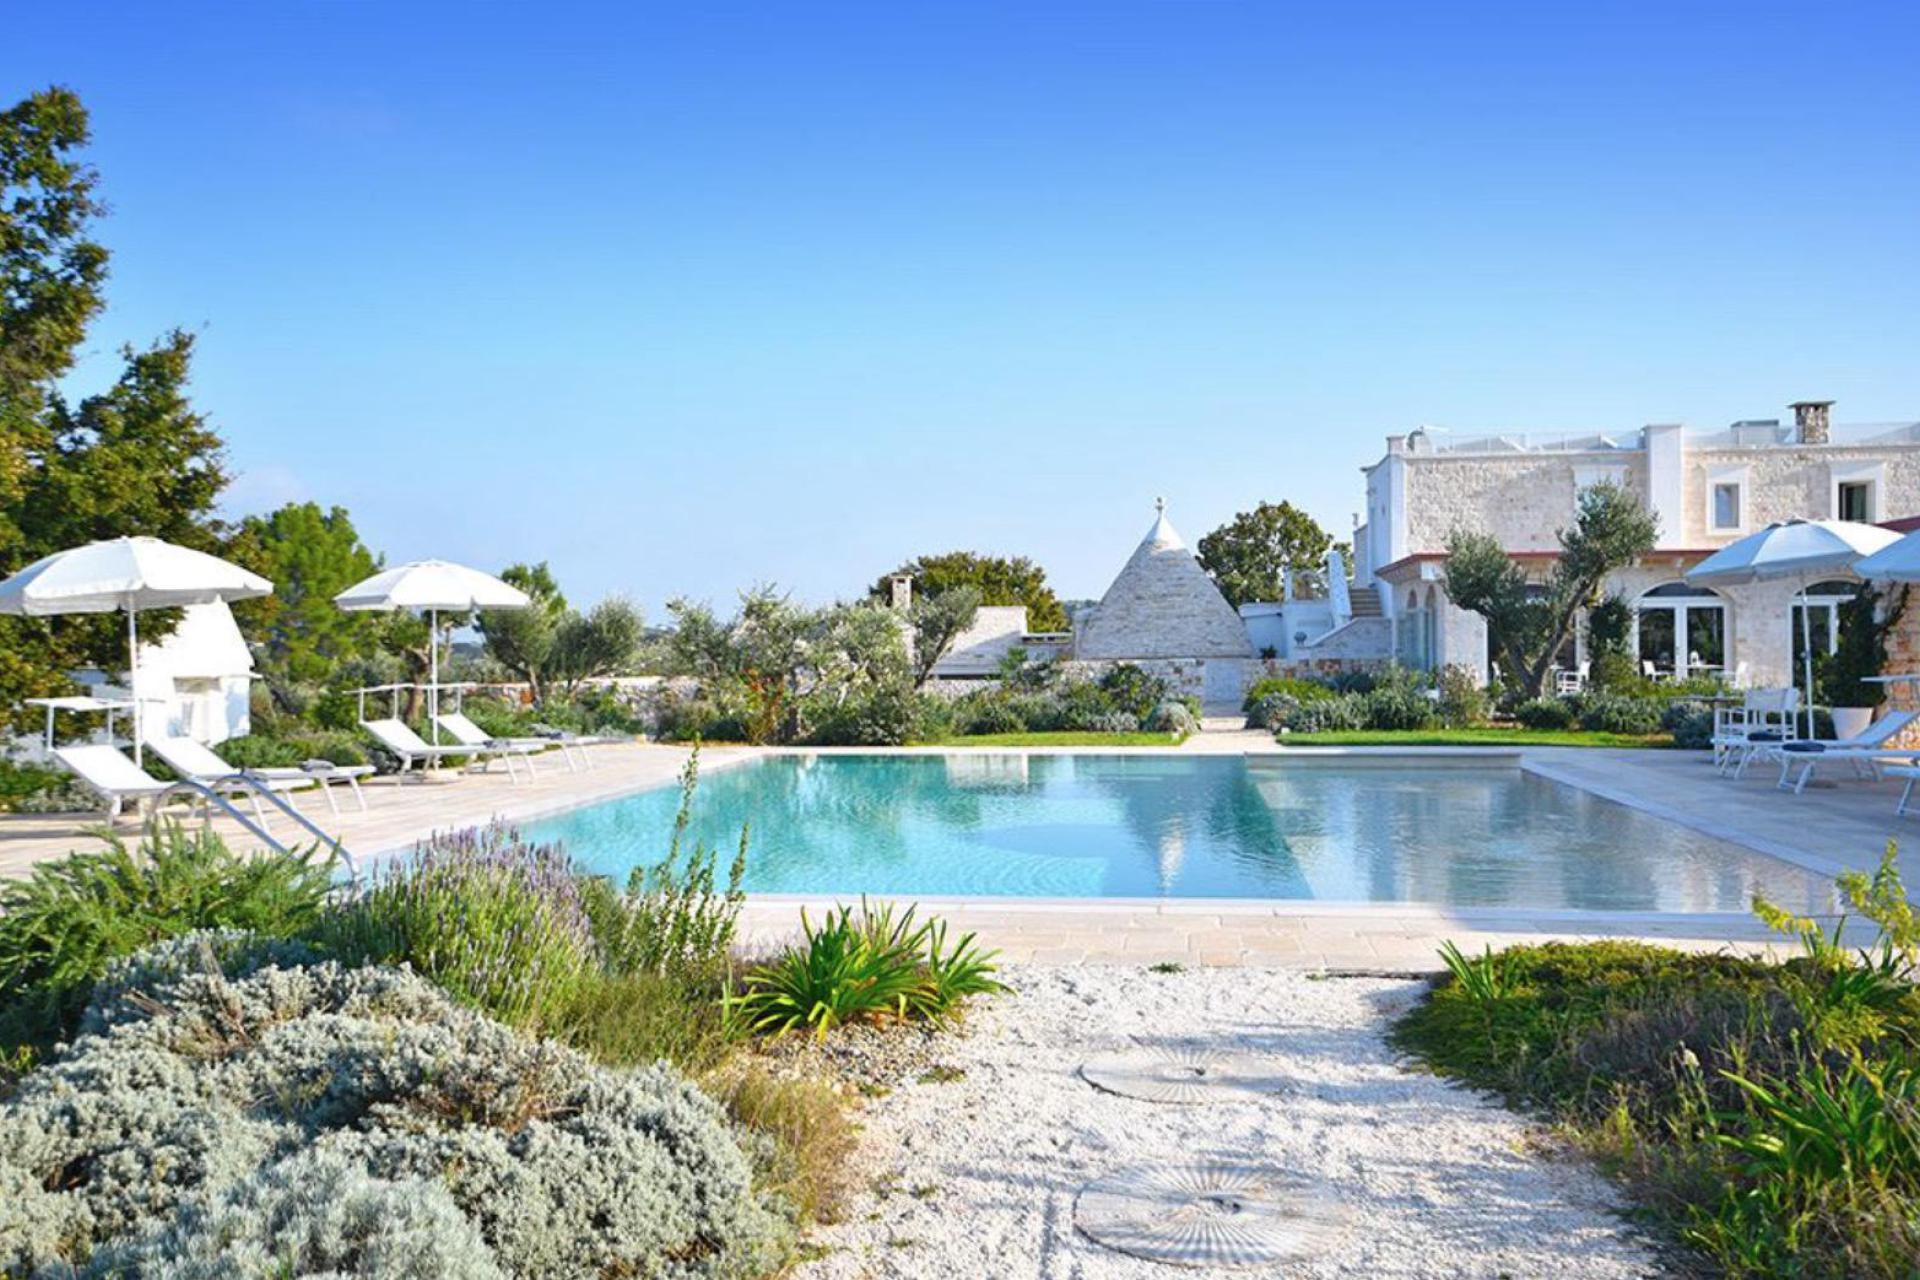 Southern Italian hospitality in authentic trulli